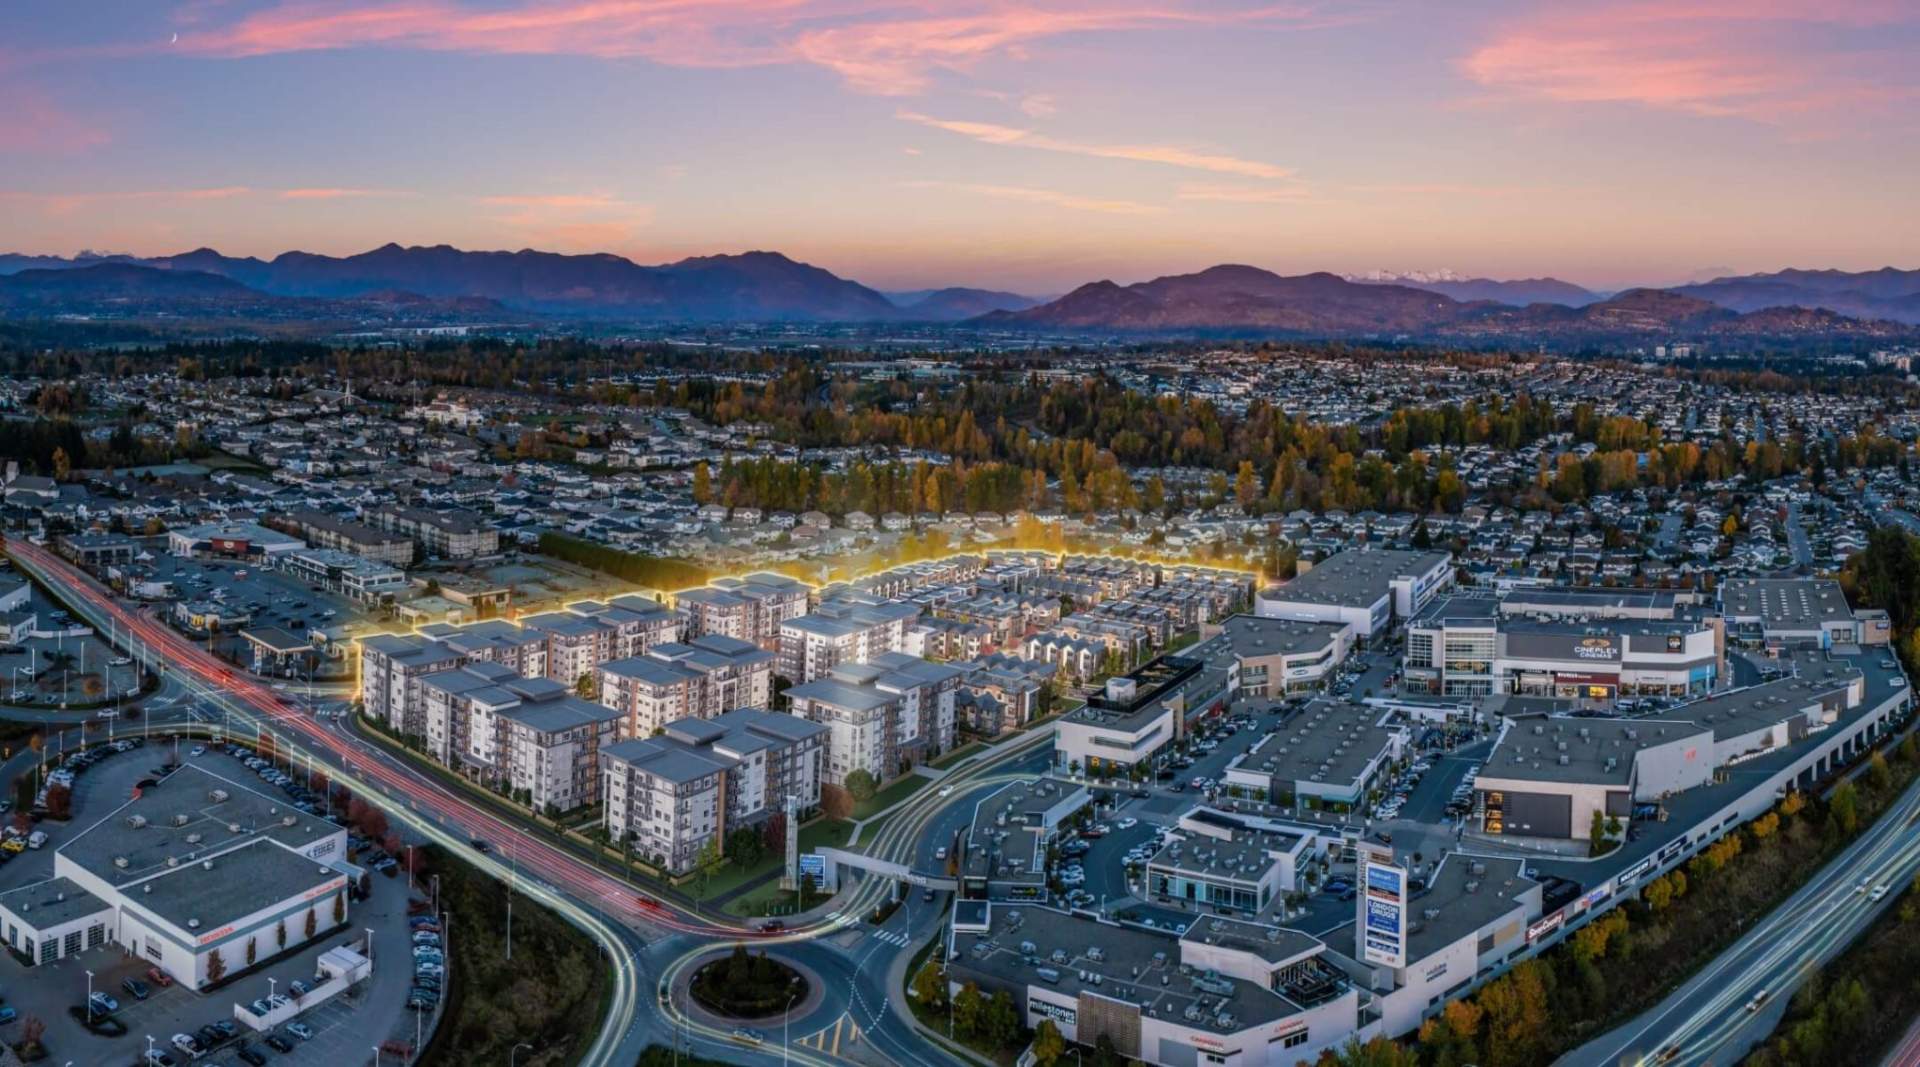 A 12-acre, master-planned Abbotsford community consisting of 157 townhomes and 577 condominiums.